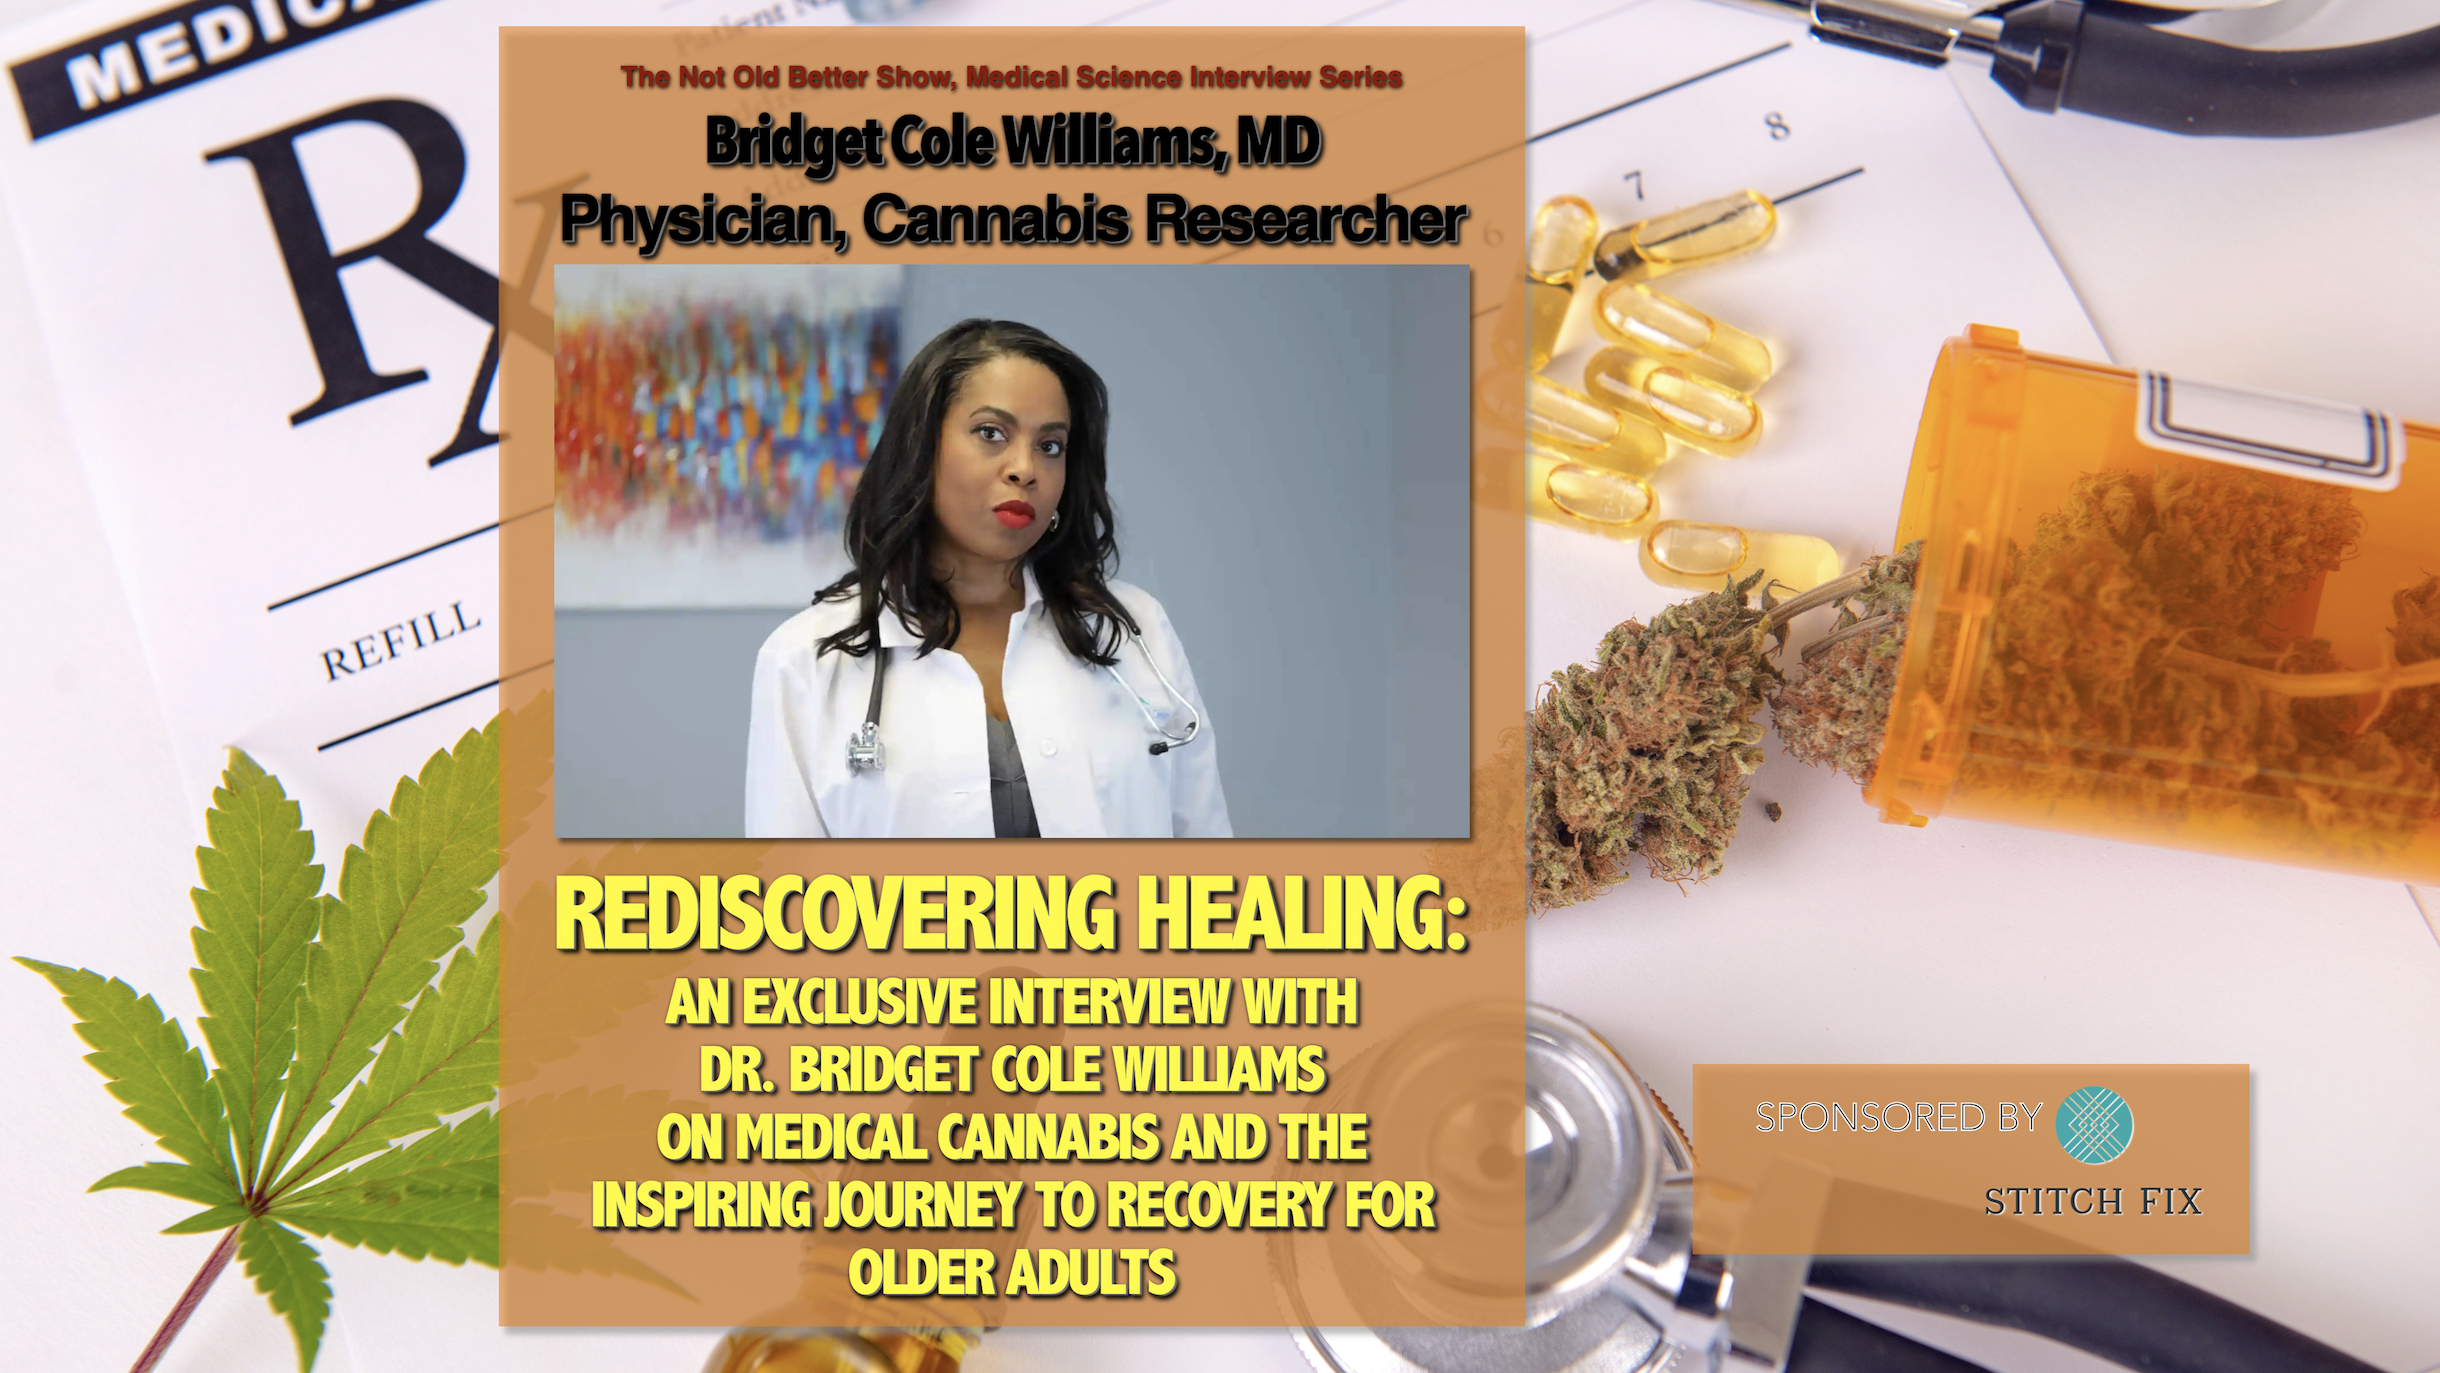 REDISCOVER HEALING: MEDICAL CANNABIS-Bridget Cole Williams, MD